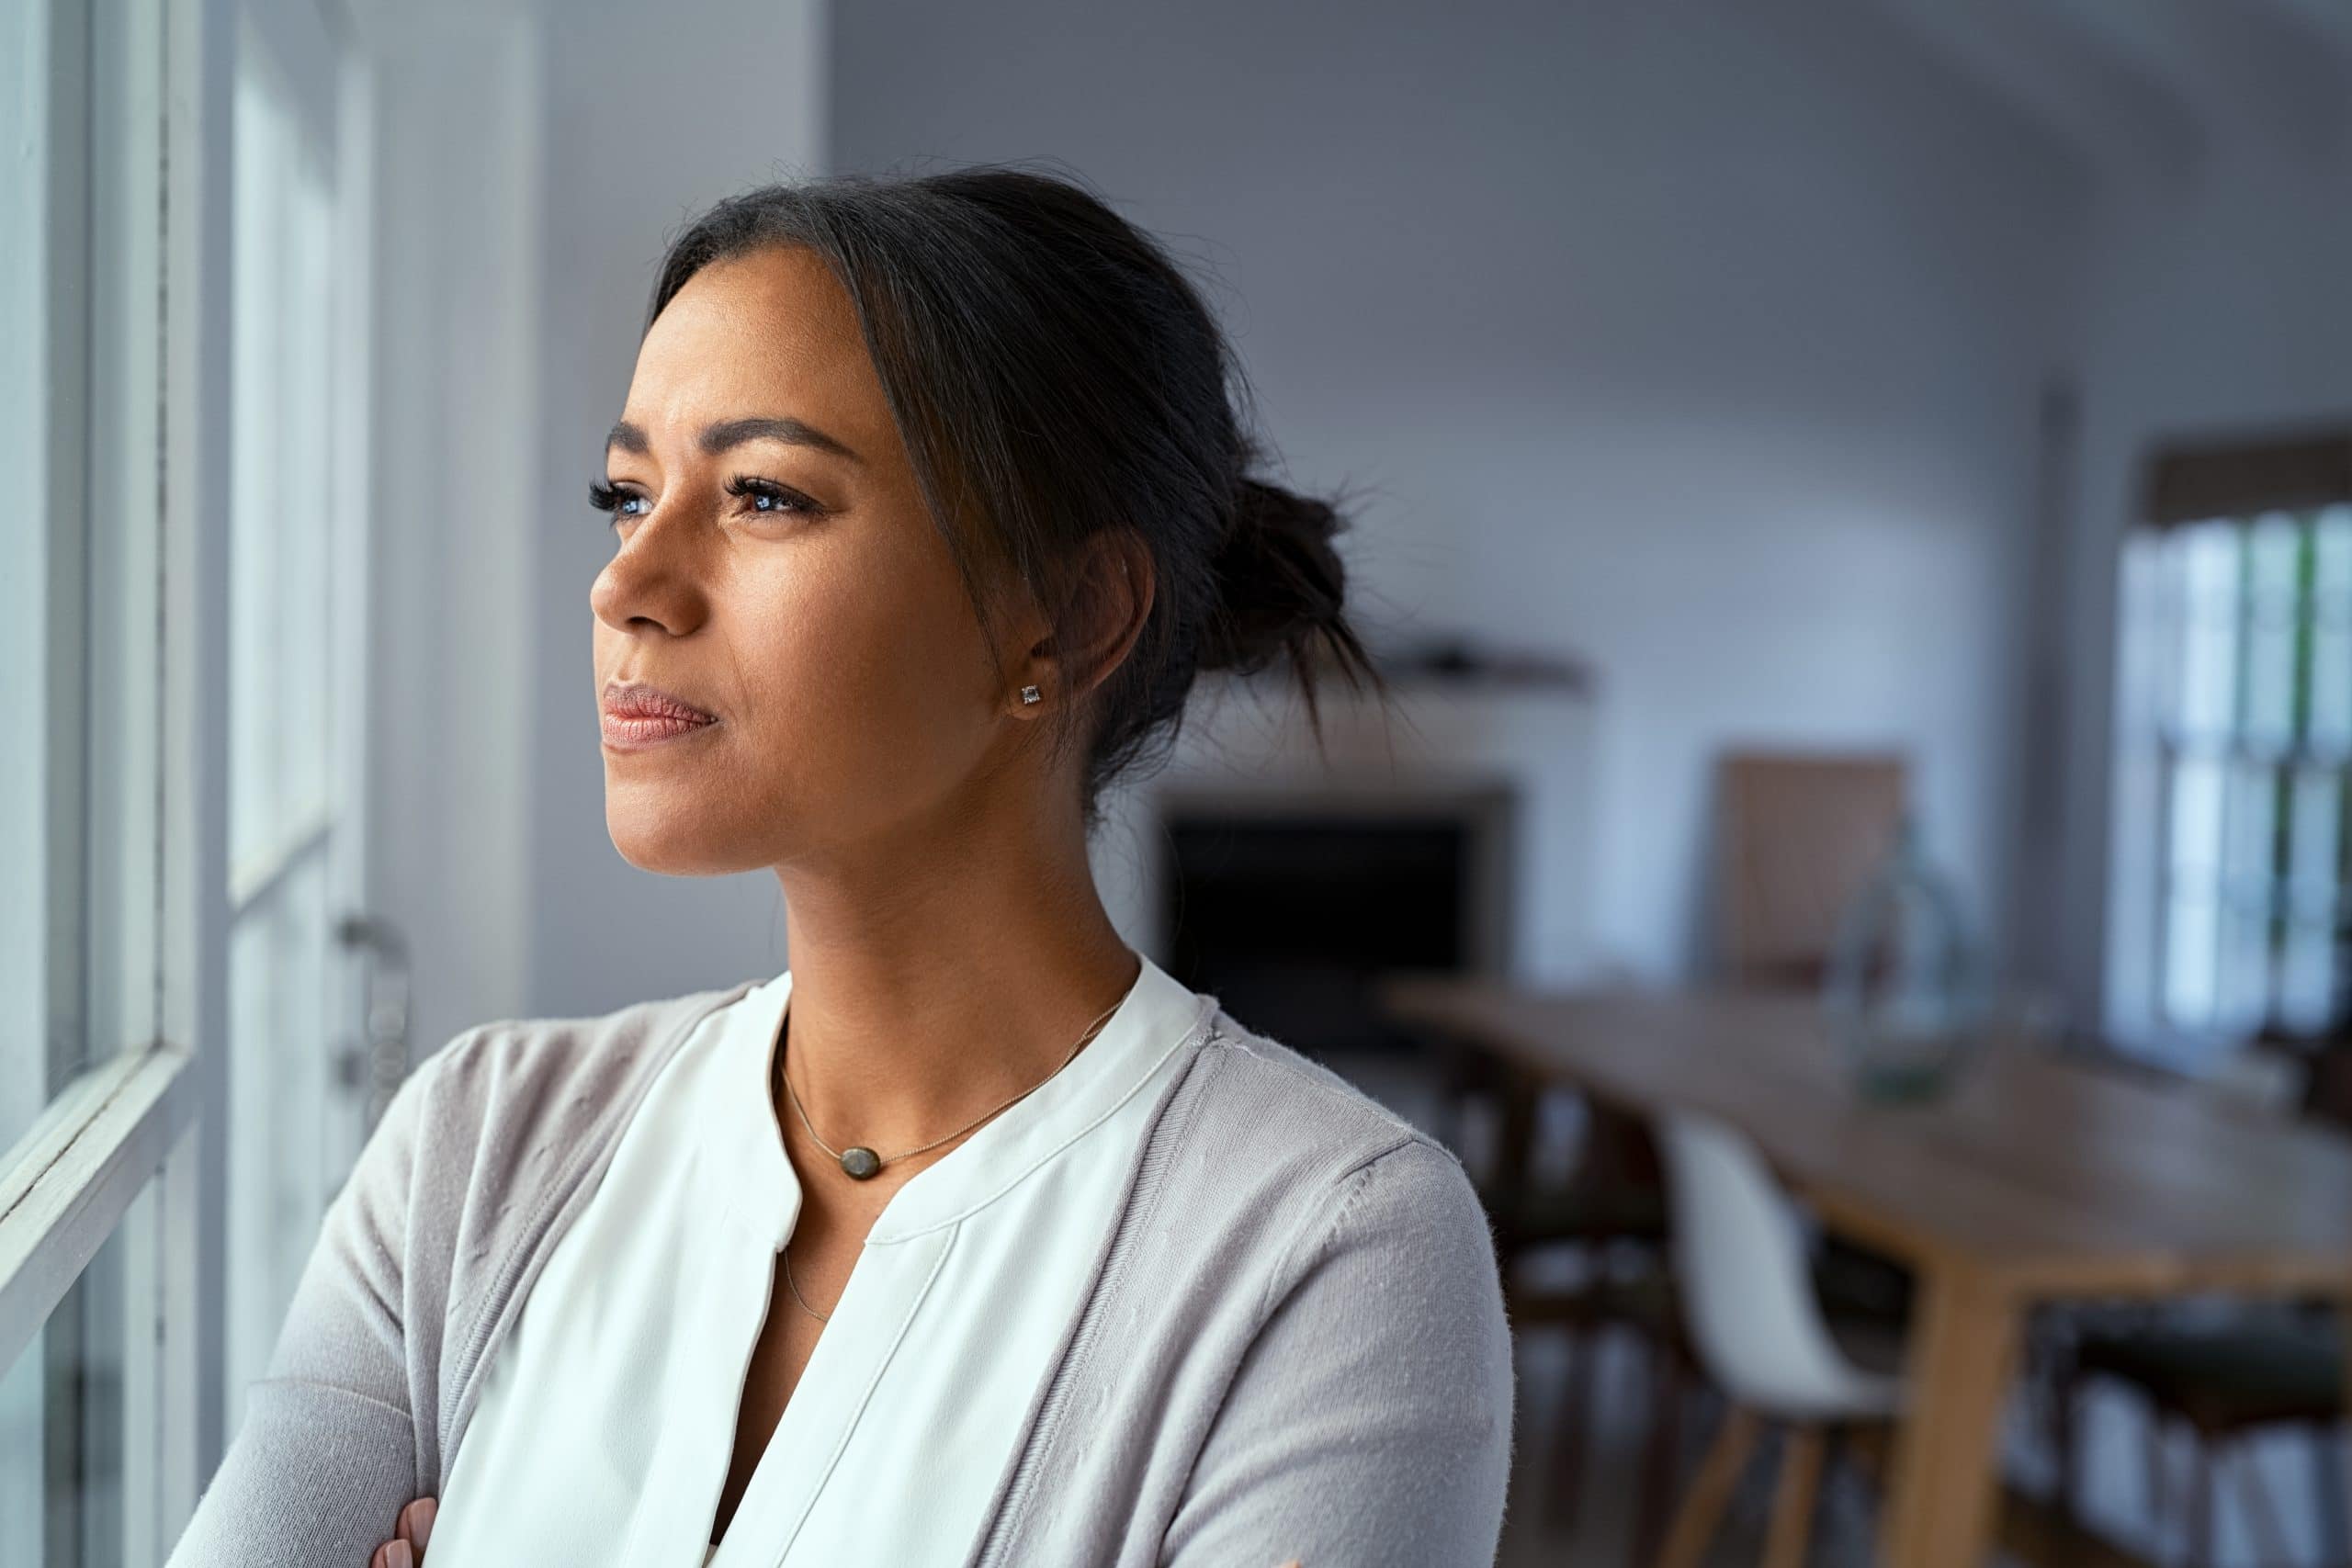 A Concerned Woman Looks Out The Window. Vulvar Pain And Vulvodynia Can Be Treated Effectively.